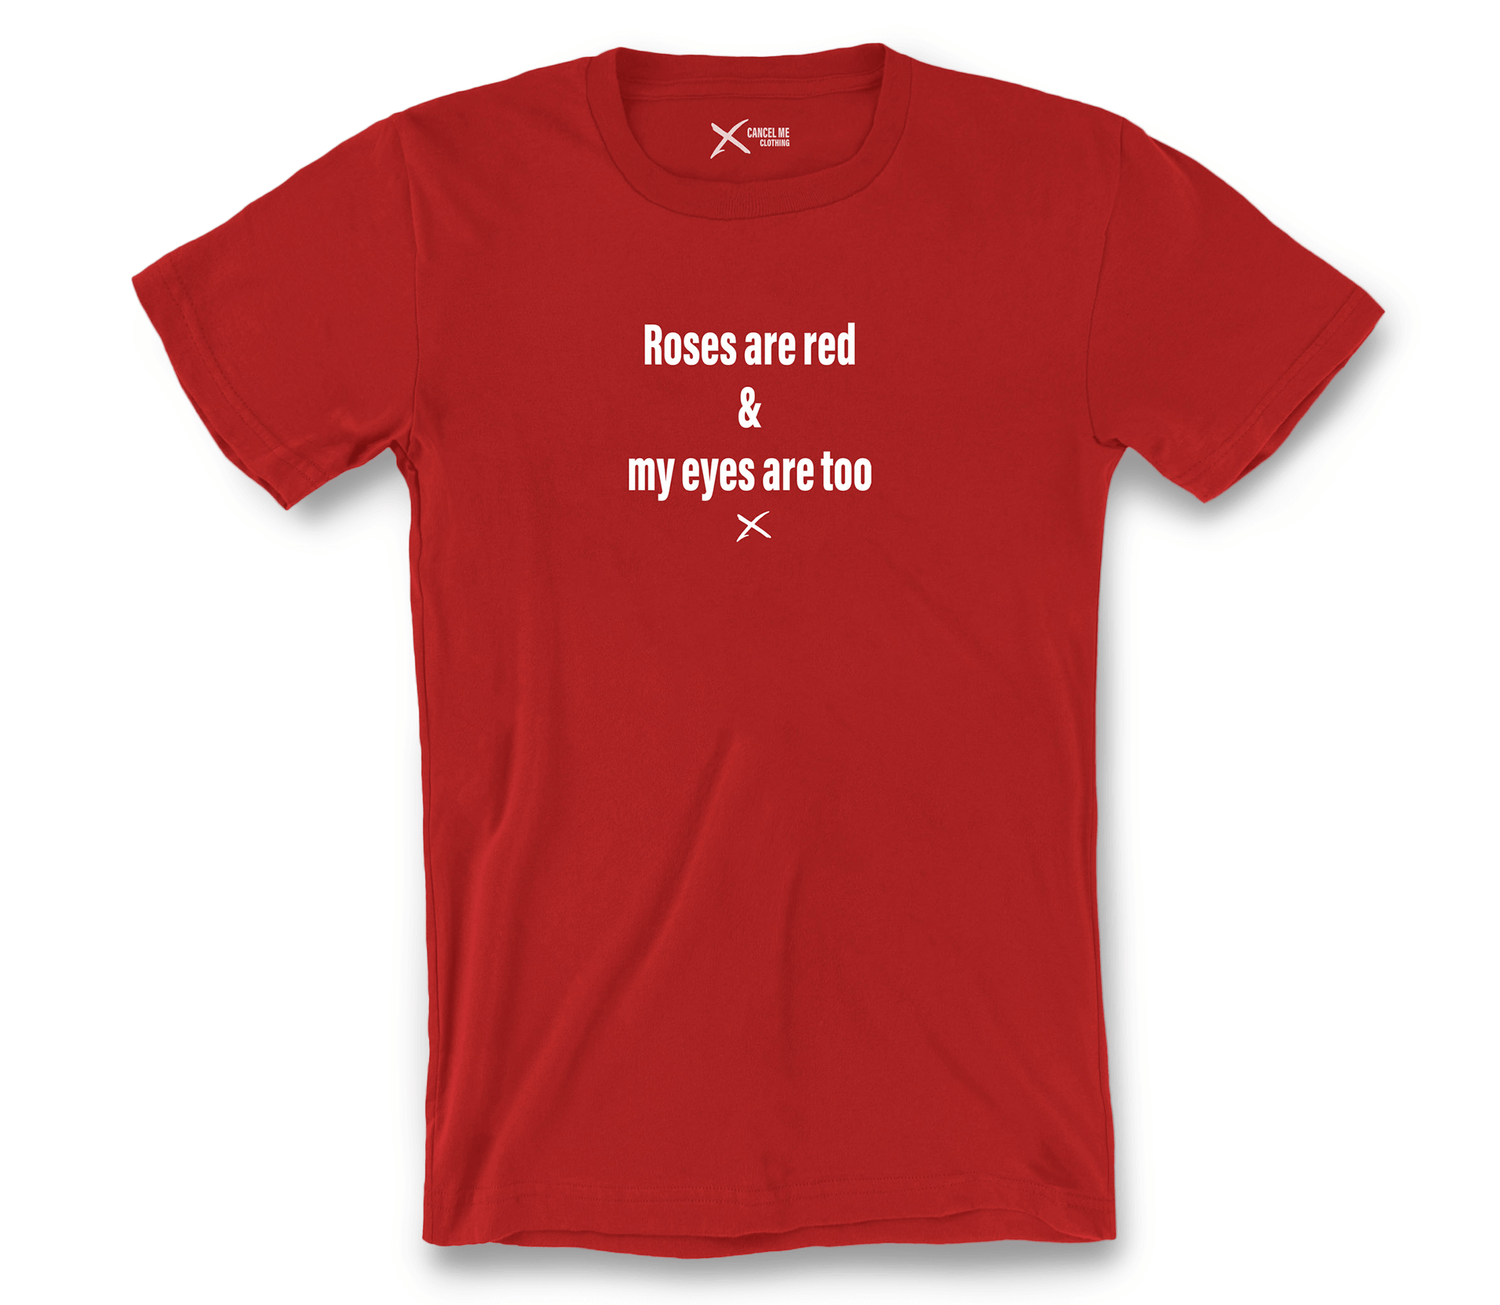 lp-famous_sayings_2-shirt_7792000532650_roses-are-red-my-eyes-are-too-shirt_Red.png